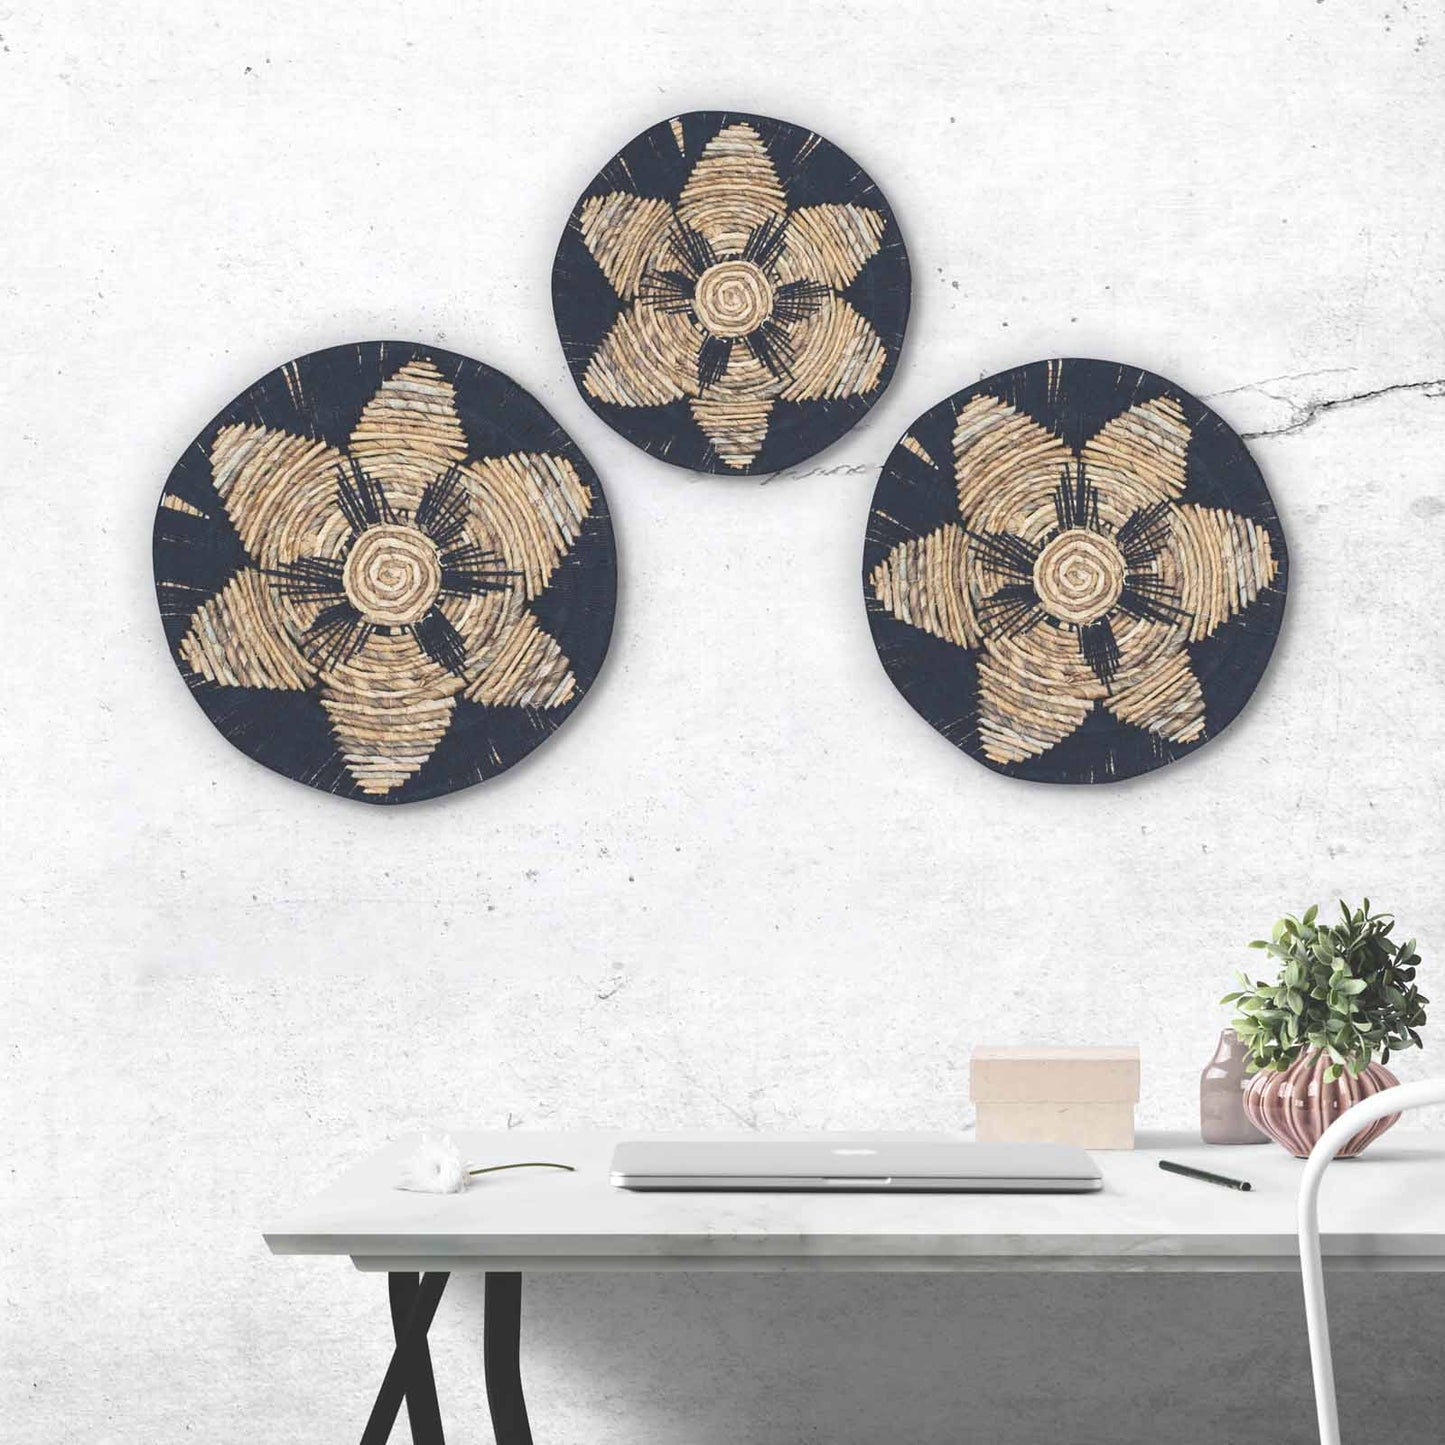 Set of 3 Seagrass Bowls Wall Art - Cream or Black